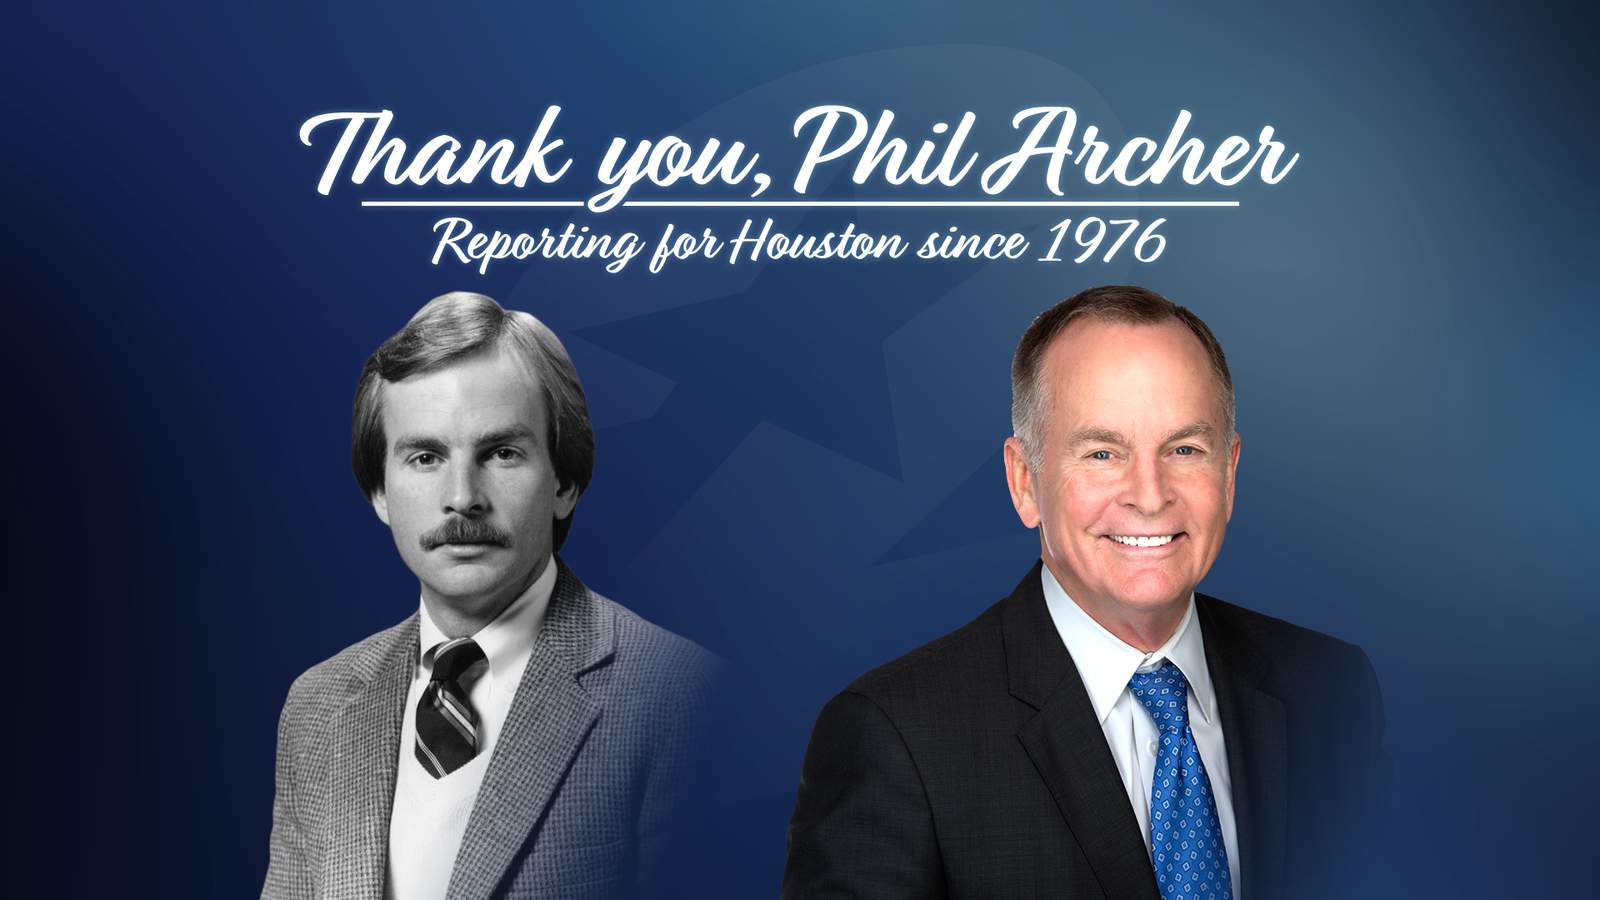 Send Phil Archer your well-wishes